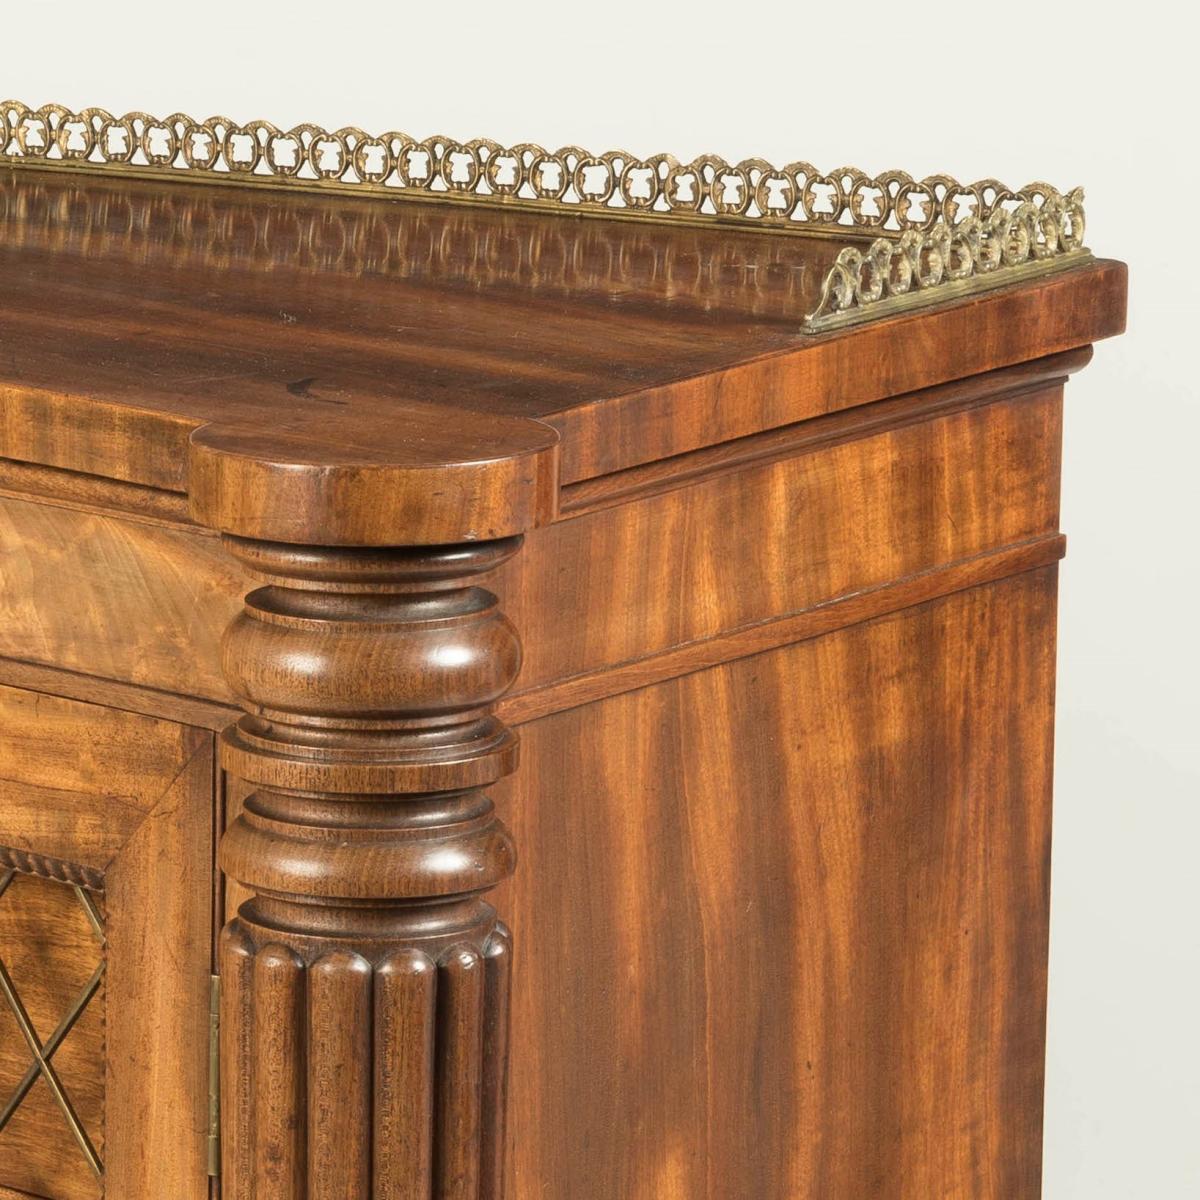 A Rare Regency Concave Side Cabinet Firmly attributed to Gillows